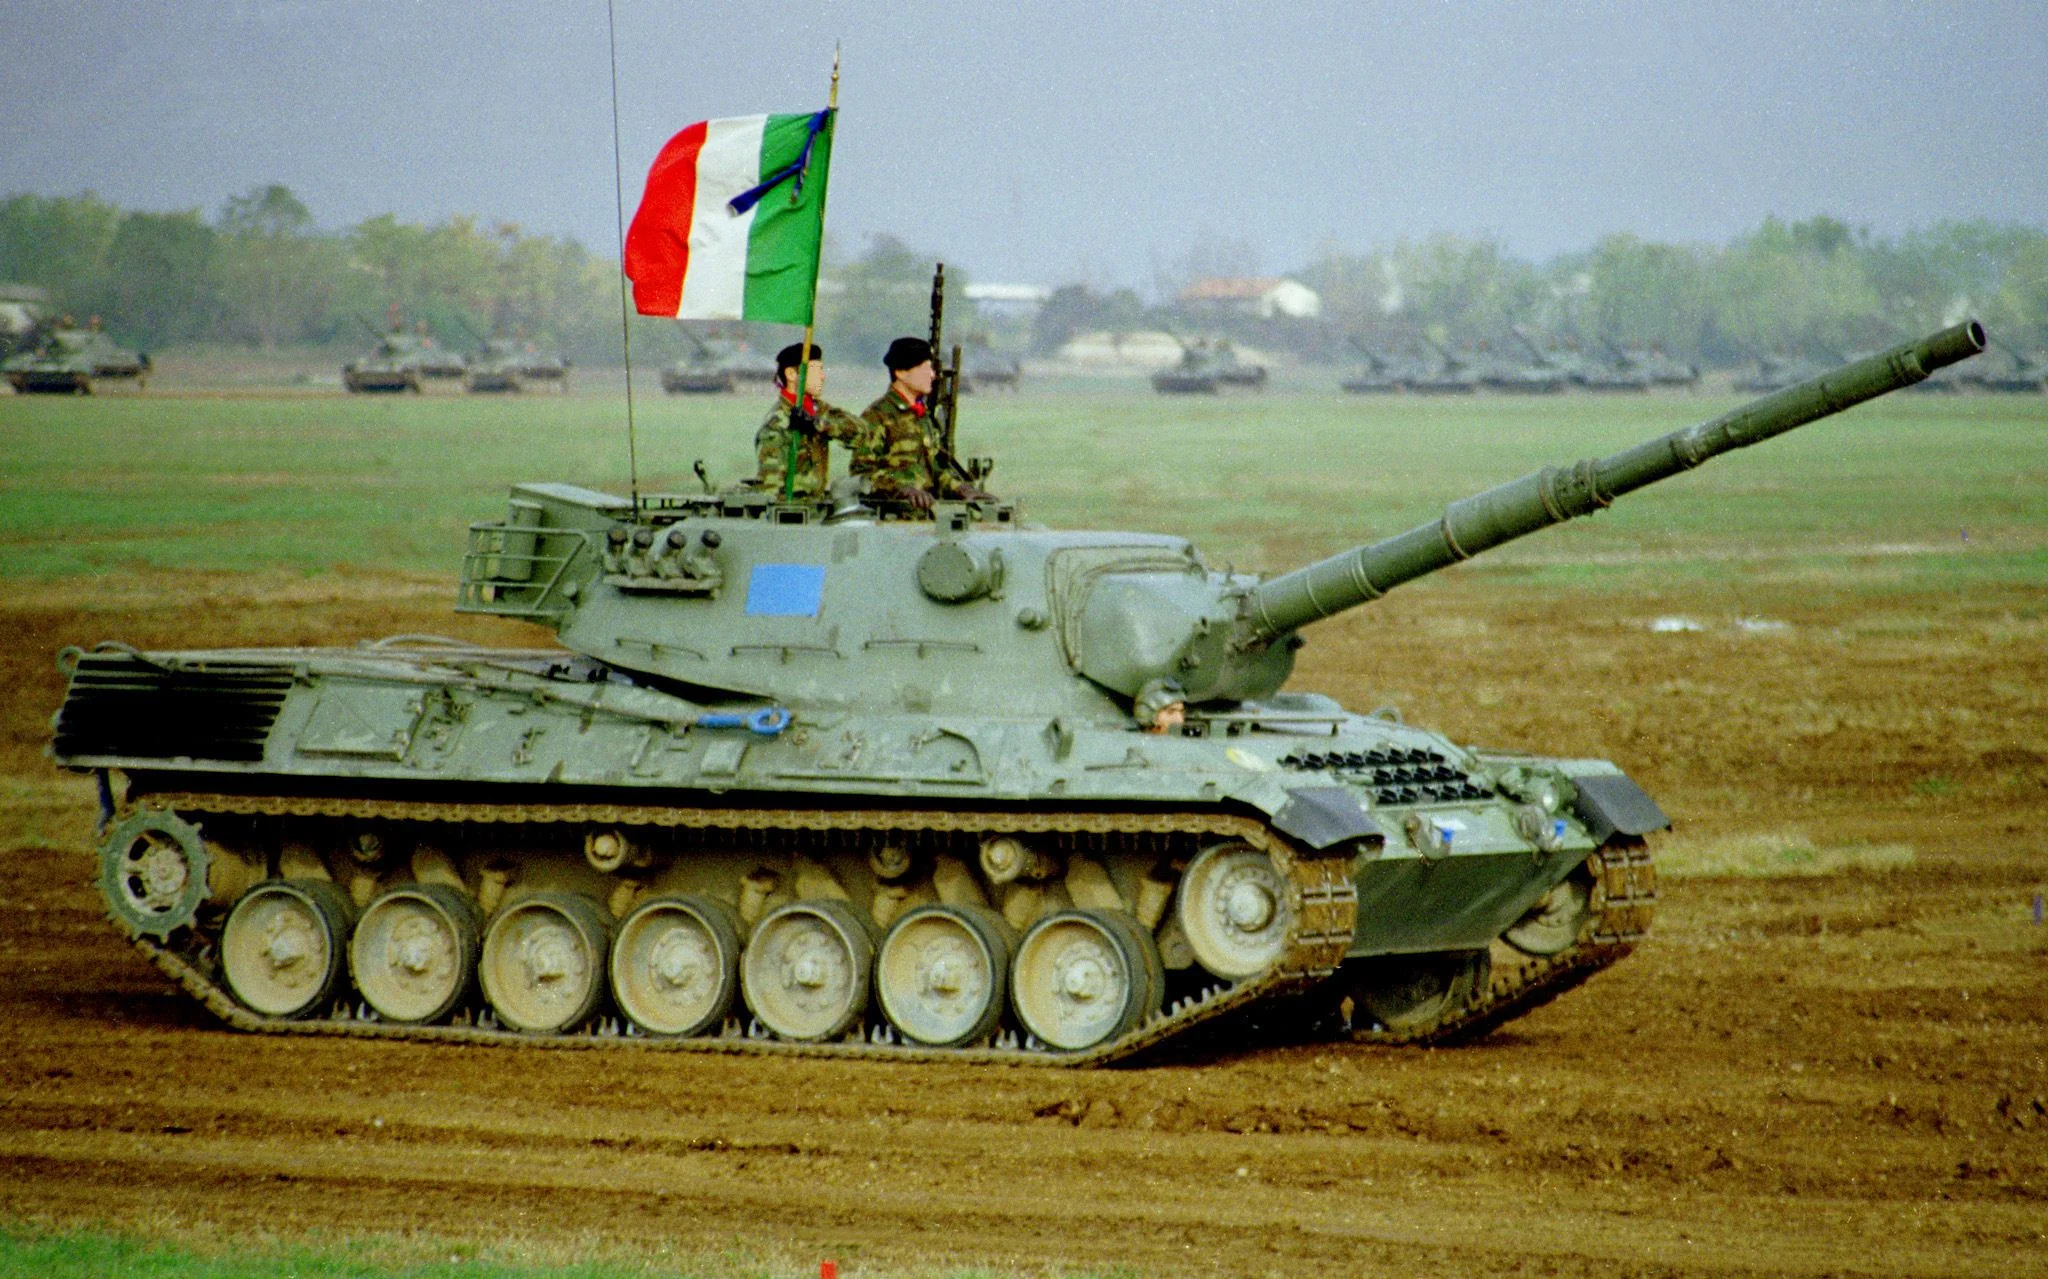 Italian Leopard 1A5 MBT Defense Express Swiss Defense Company Seeks Approval to Sell Leopard 1A5 Tanks, Potential Interest from the Netherlands